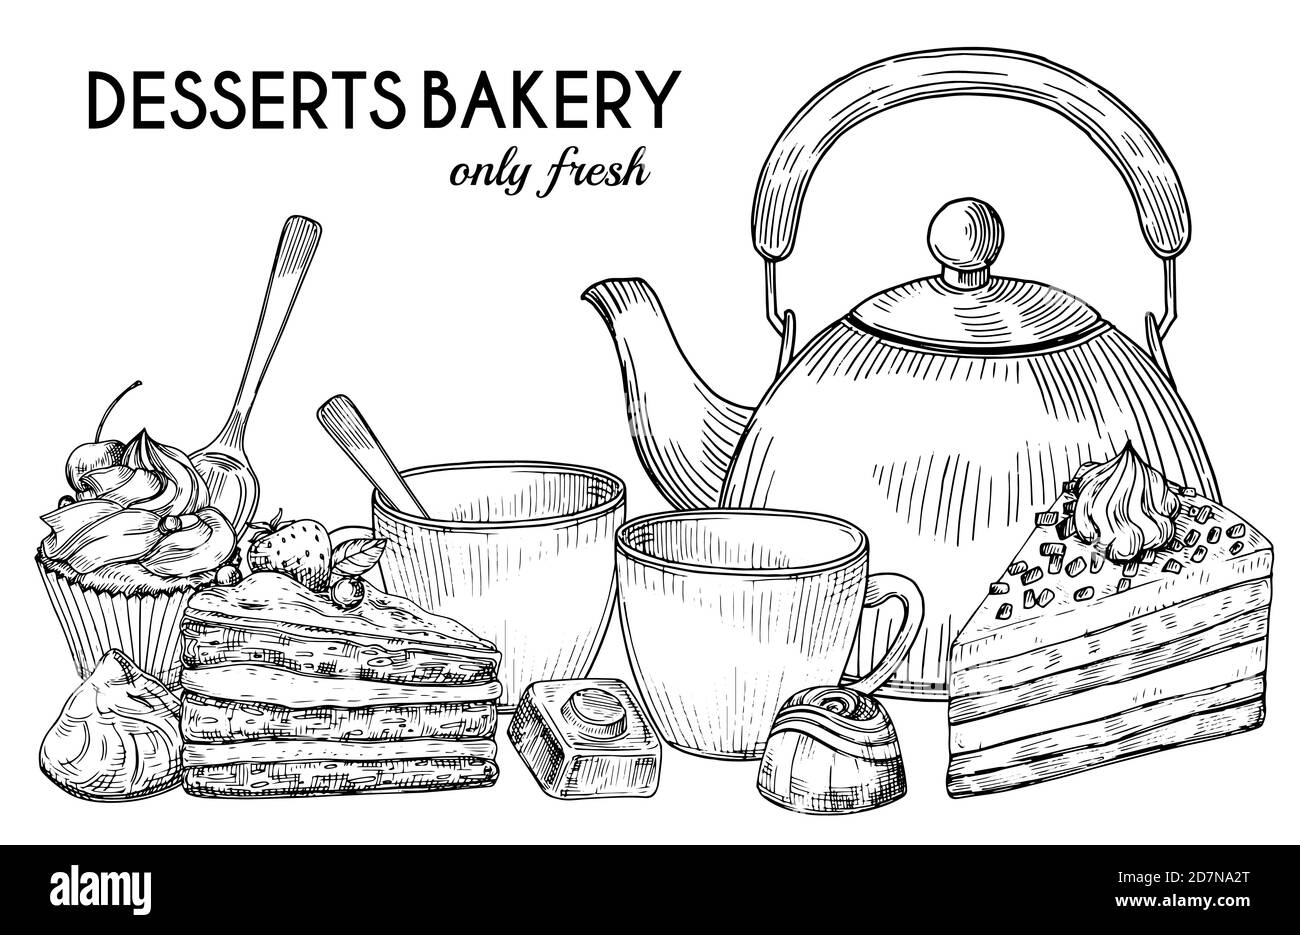 bakery shop clipart black and white school